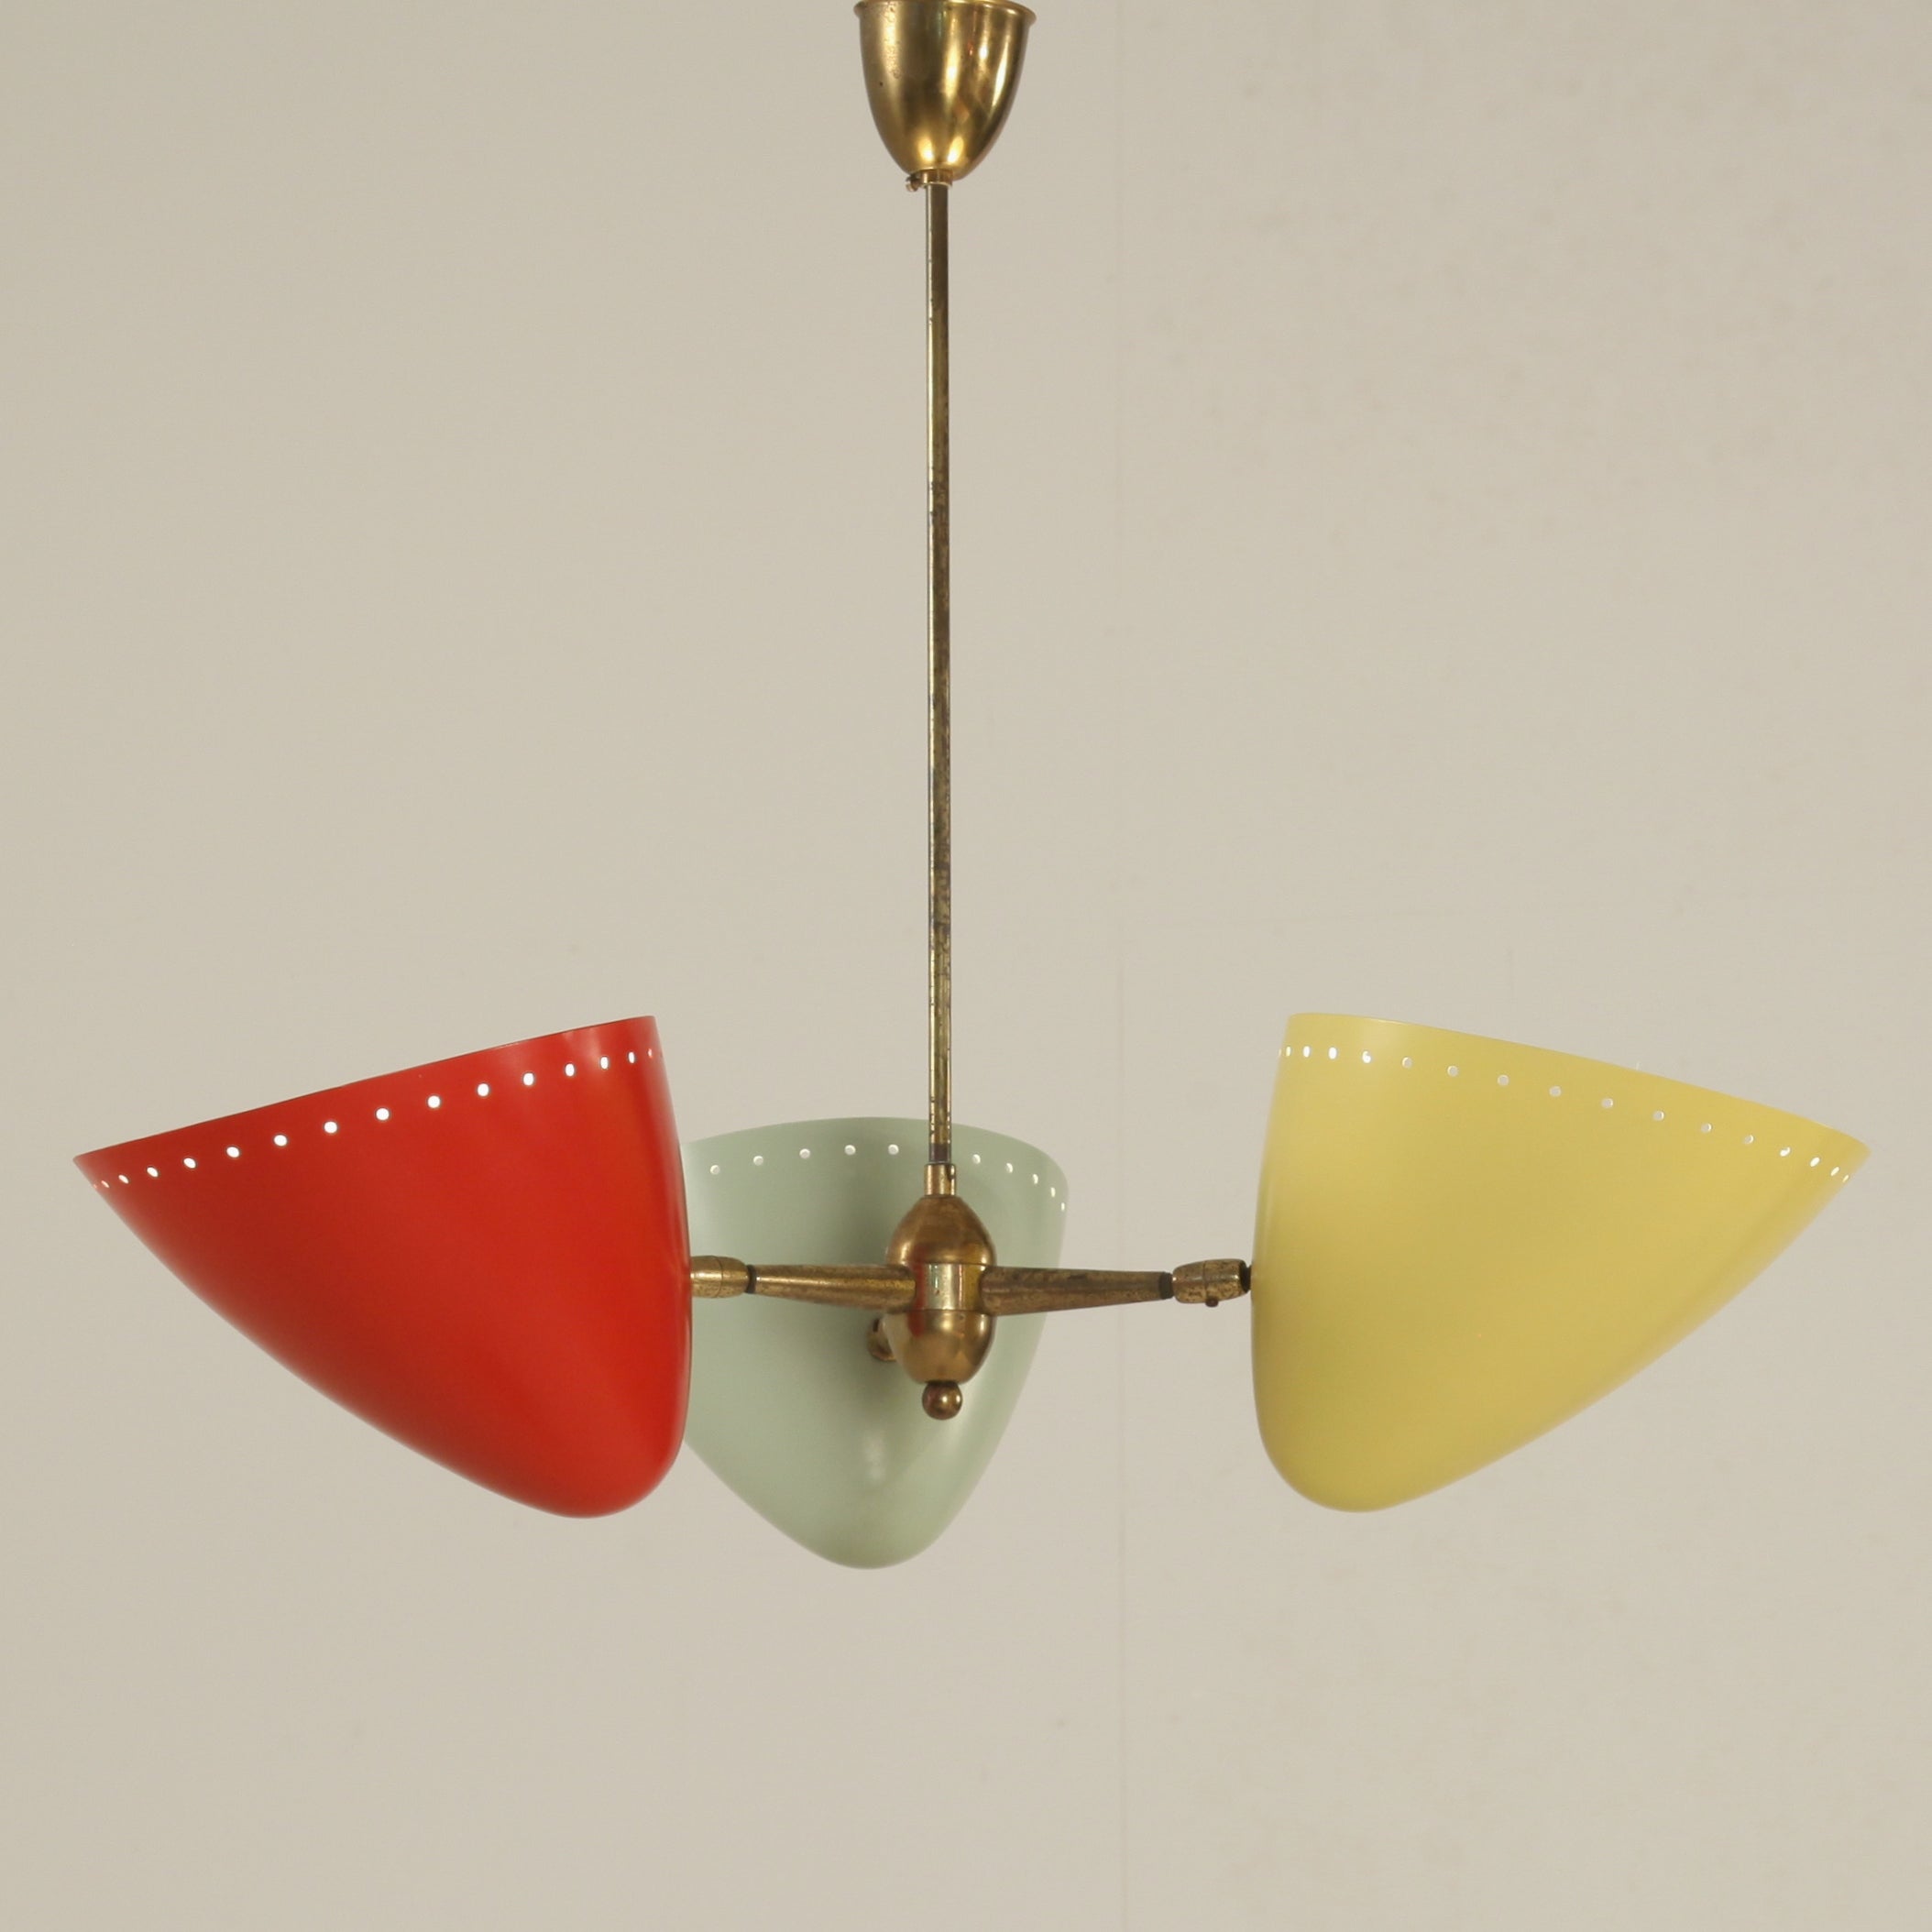 Stilnovo Chandelier With 3 Coloured Shades That Can Face Up Or Down